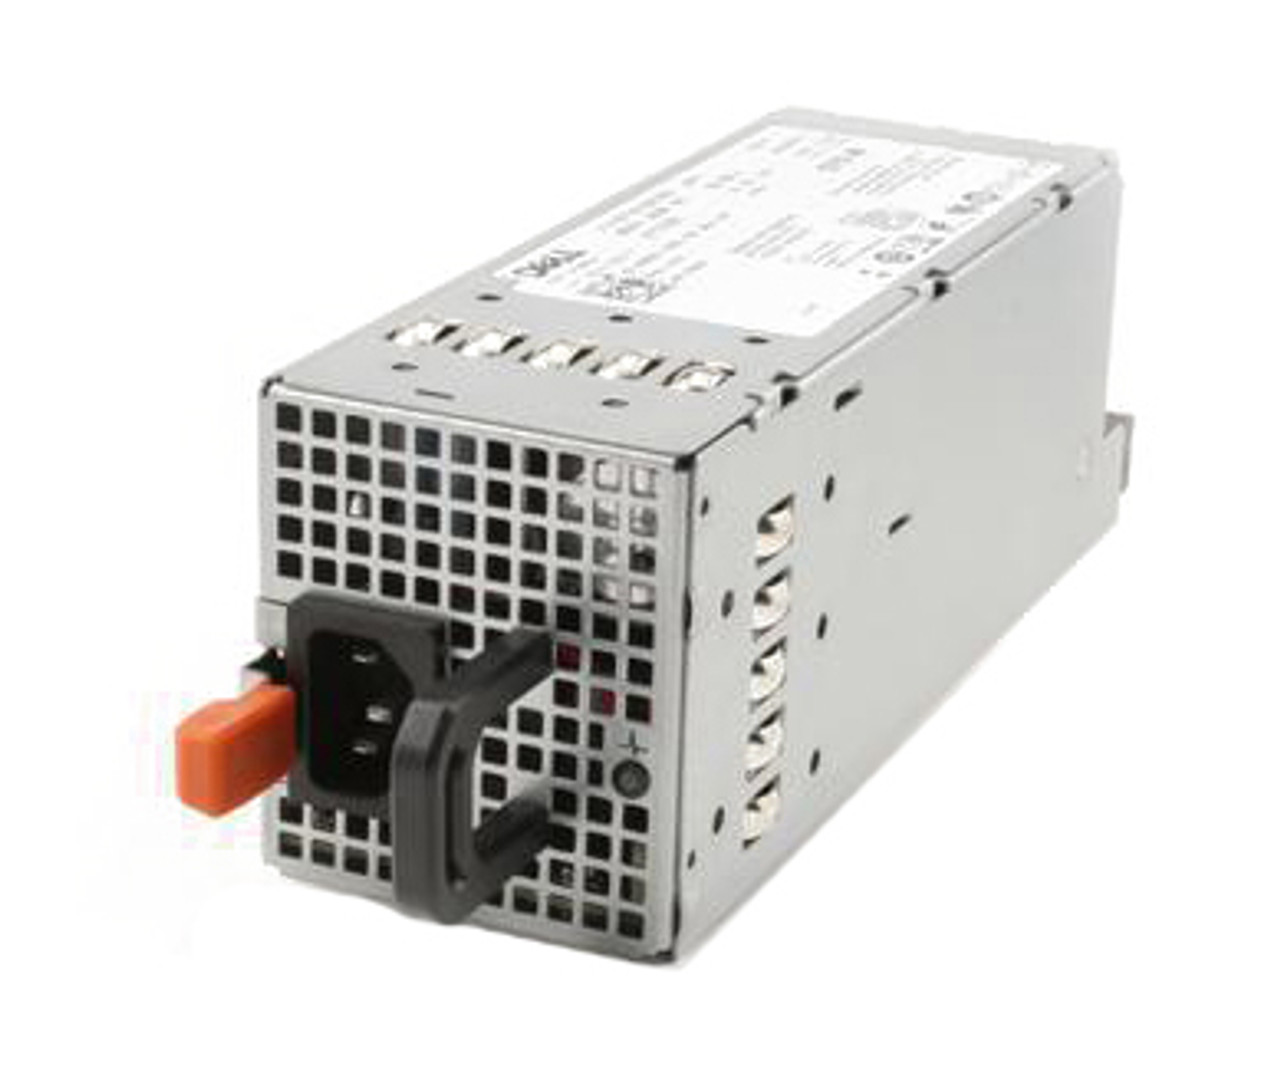 0MYXYH Dell 570-Watts Power Supply for PowerEdge R710 T610